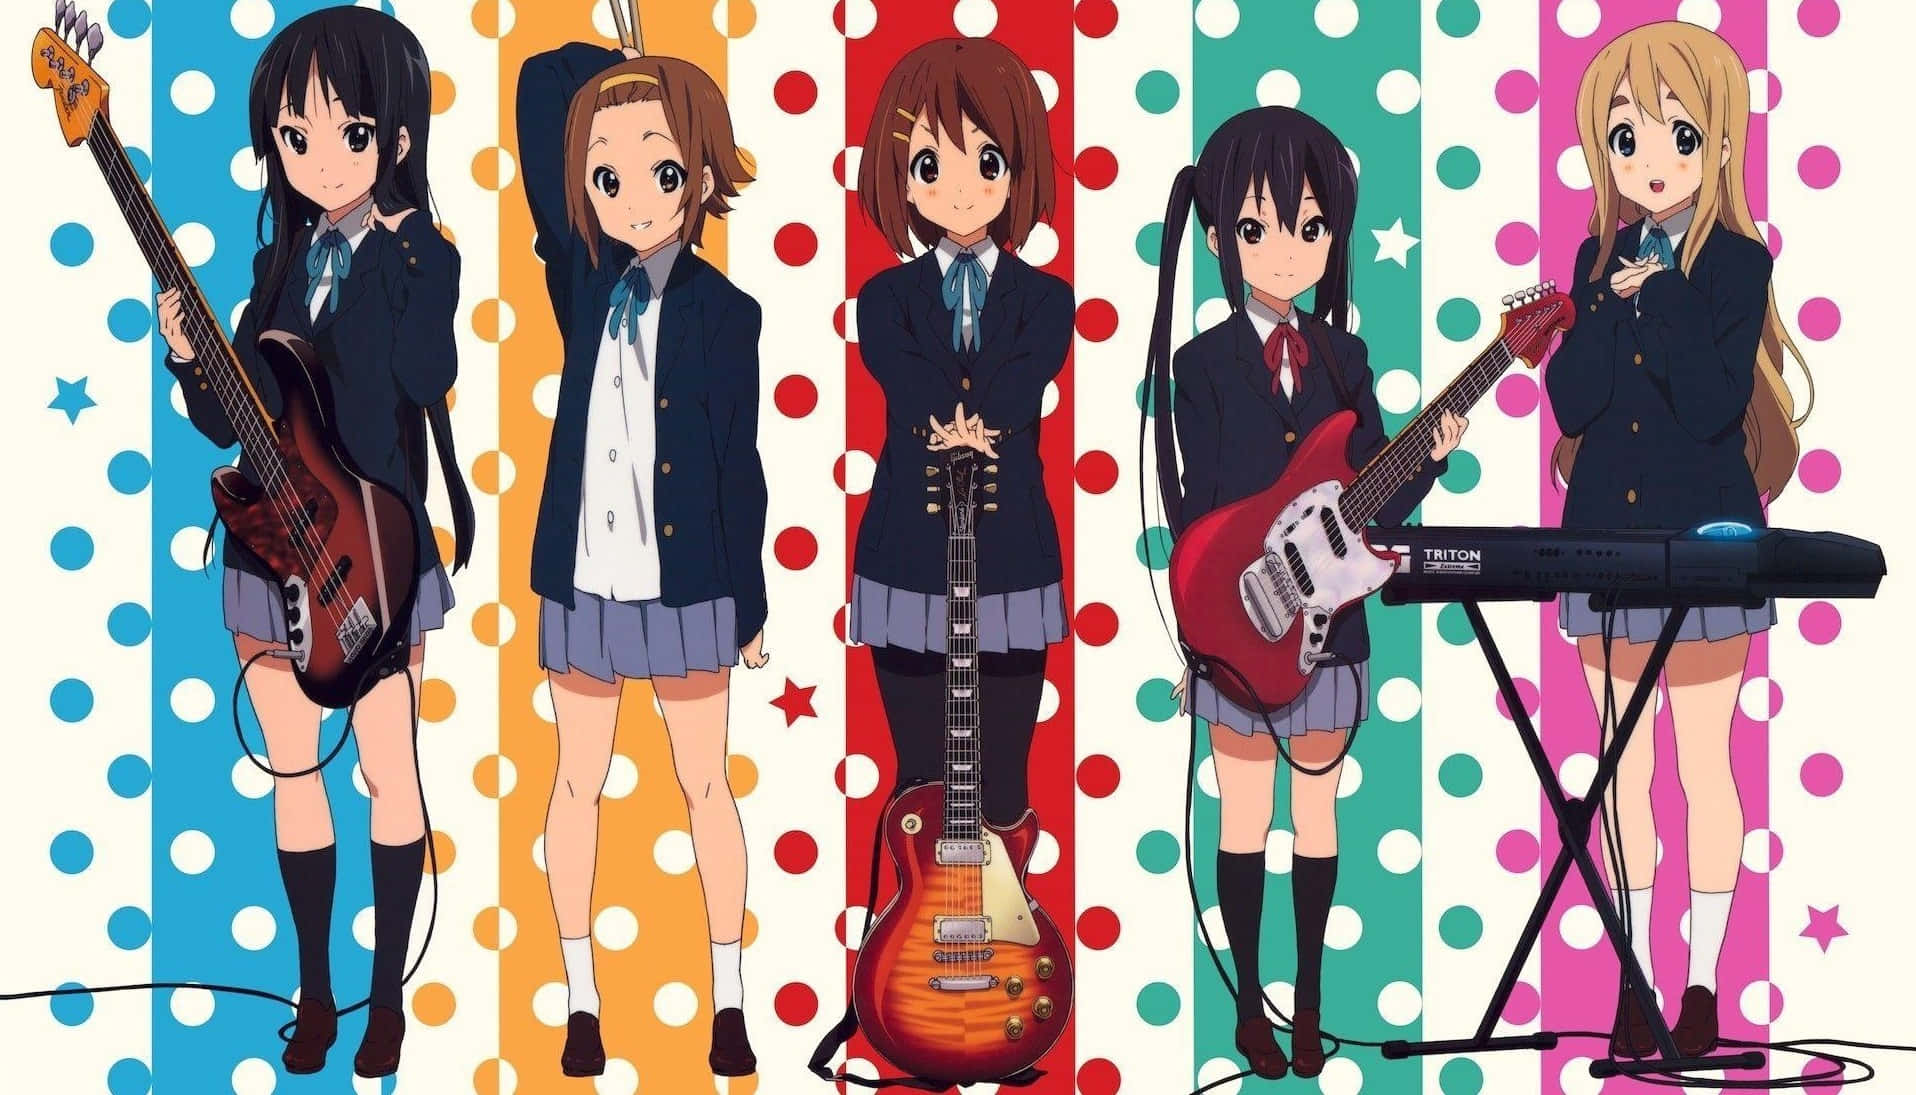 A Group Of Anime Girls With Guitars And Polka Dots